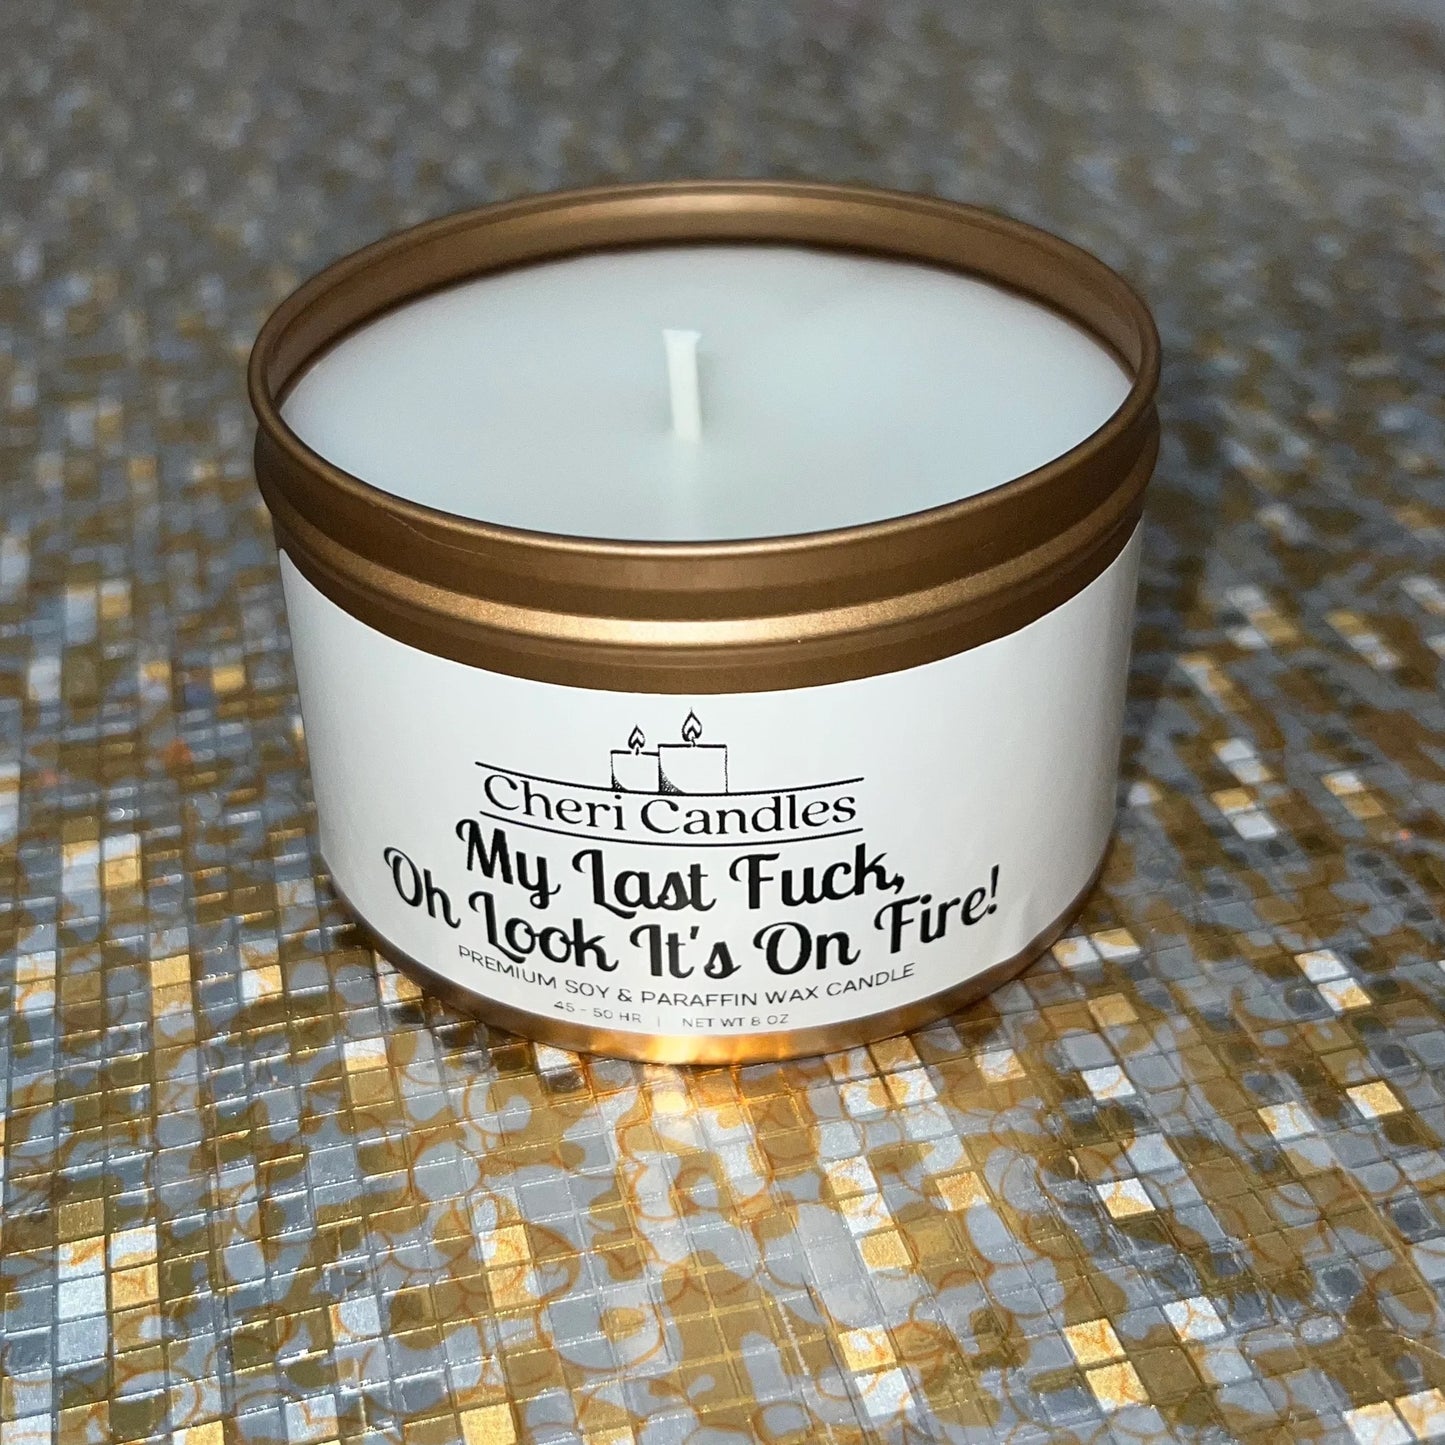 My Last Fvck, Oh Look It's On Fire! - 8 oz Cheri Candle - Choose Your Scent